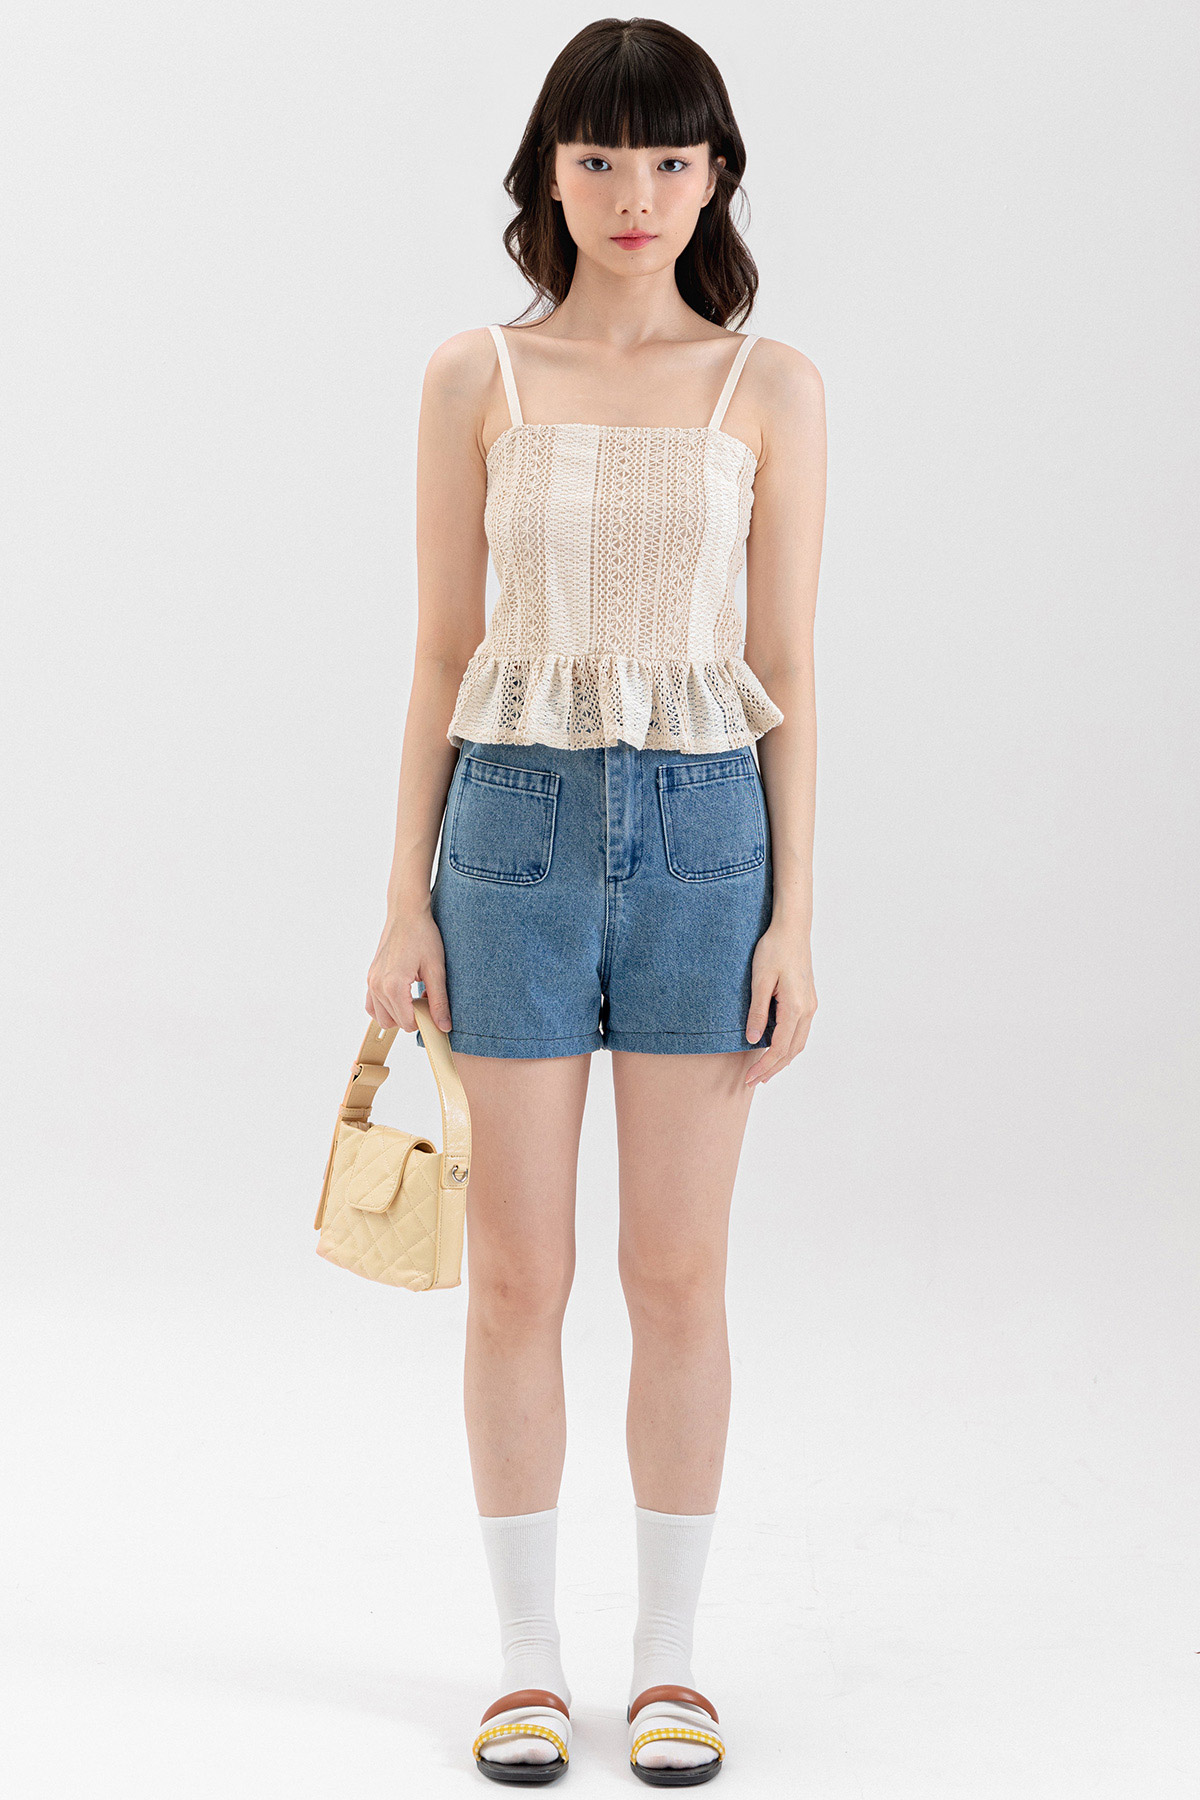 *SALE* PIA TOP - WINDSOR CREAM [BY MODPARADE]